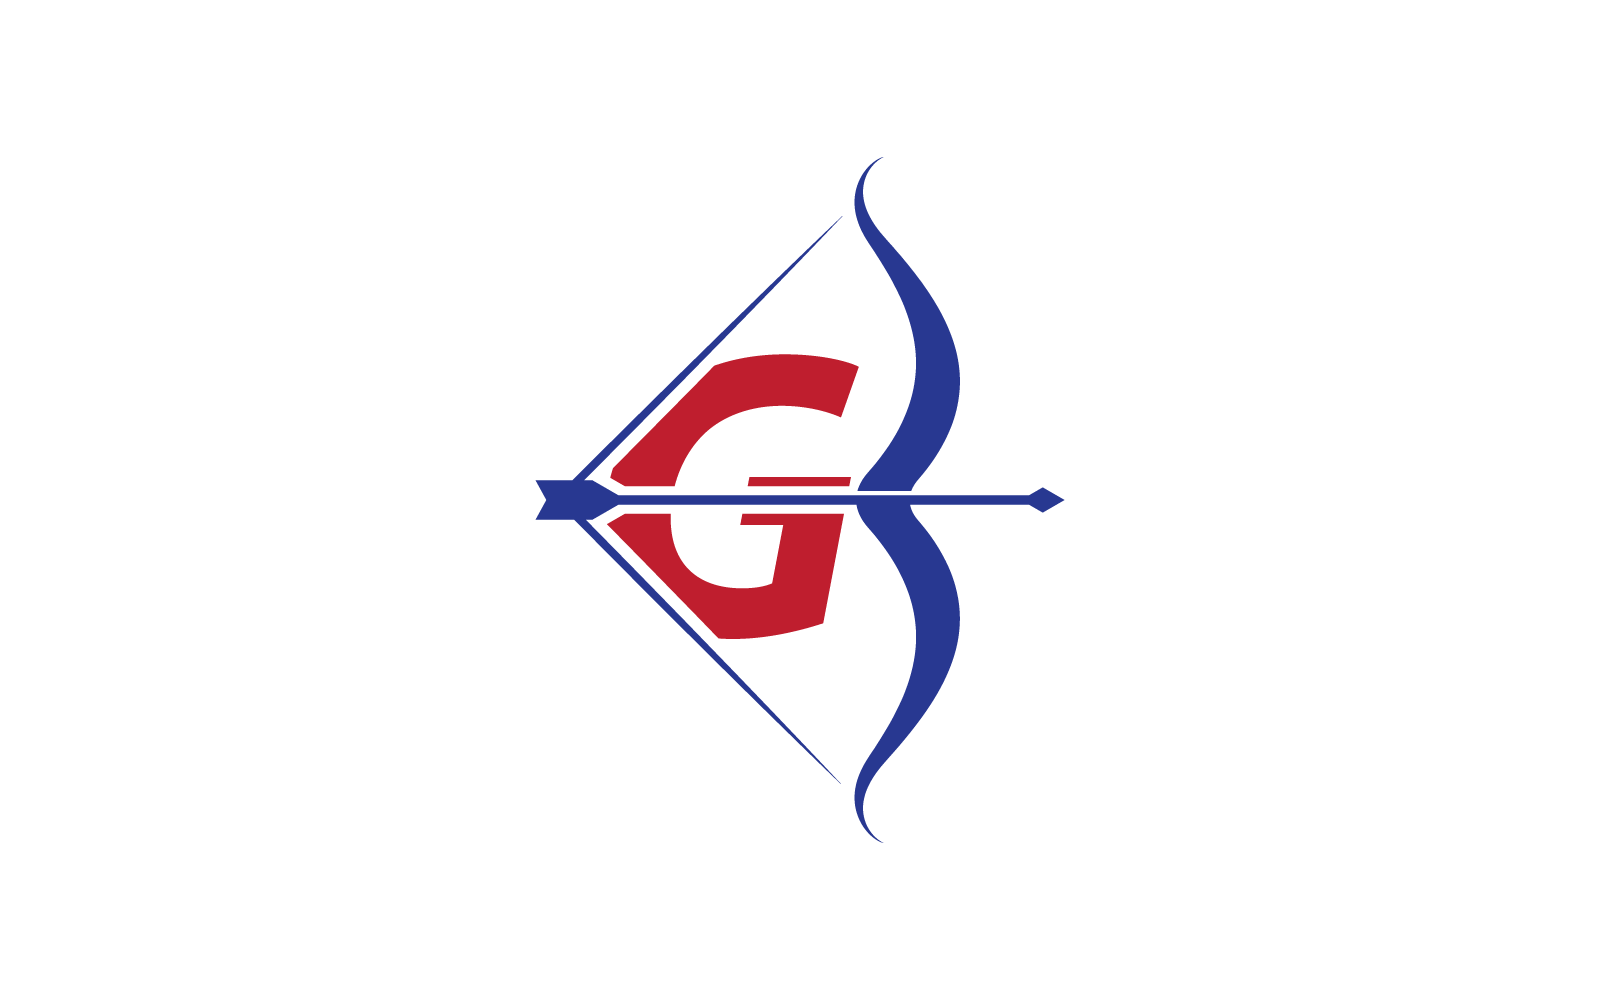 Archery logo With G initial letter vector ilustration flat design